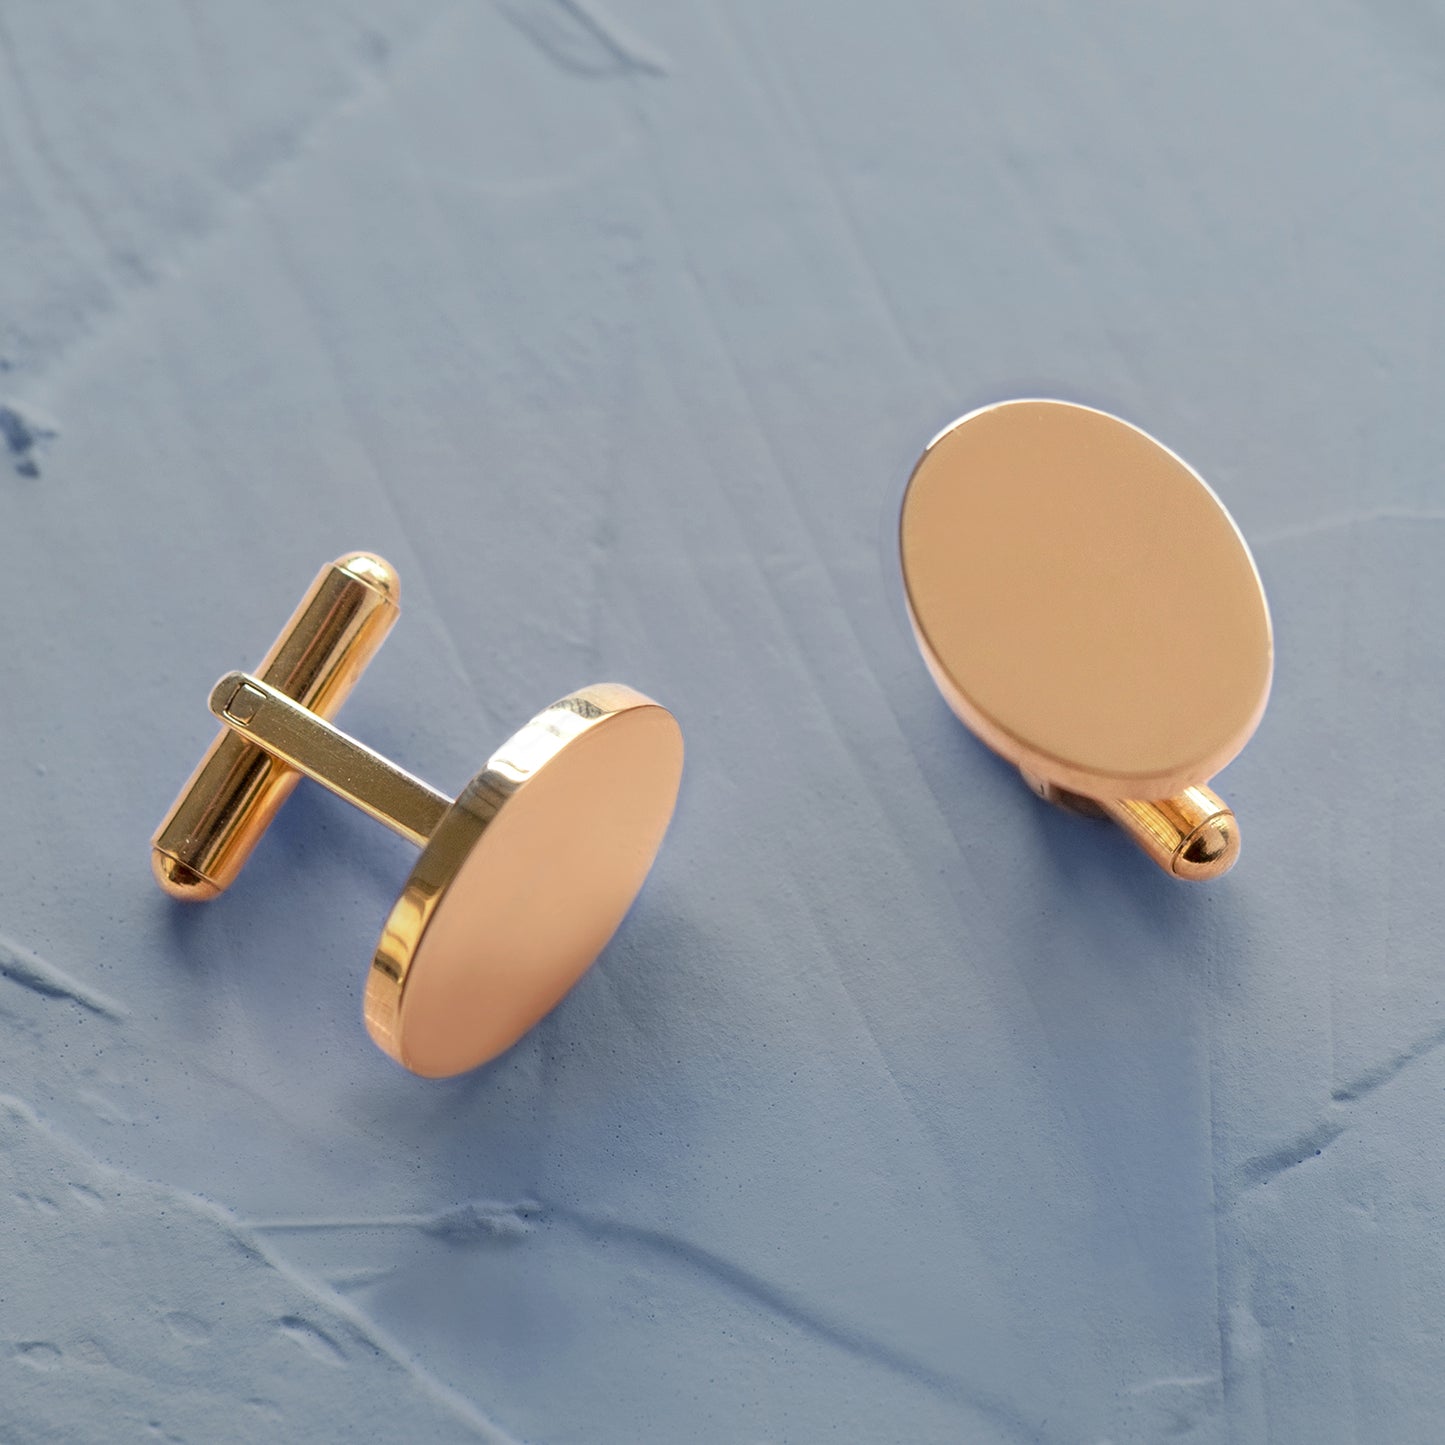 Engravable Oval Gold Plated Stainless Steel Cuff Links - Perfect for Groomsmen Gifts, Weddings, or Any Occasion